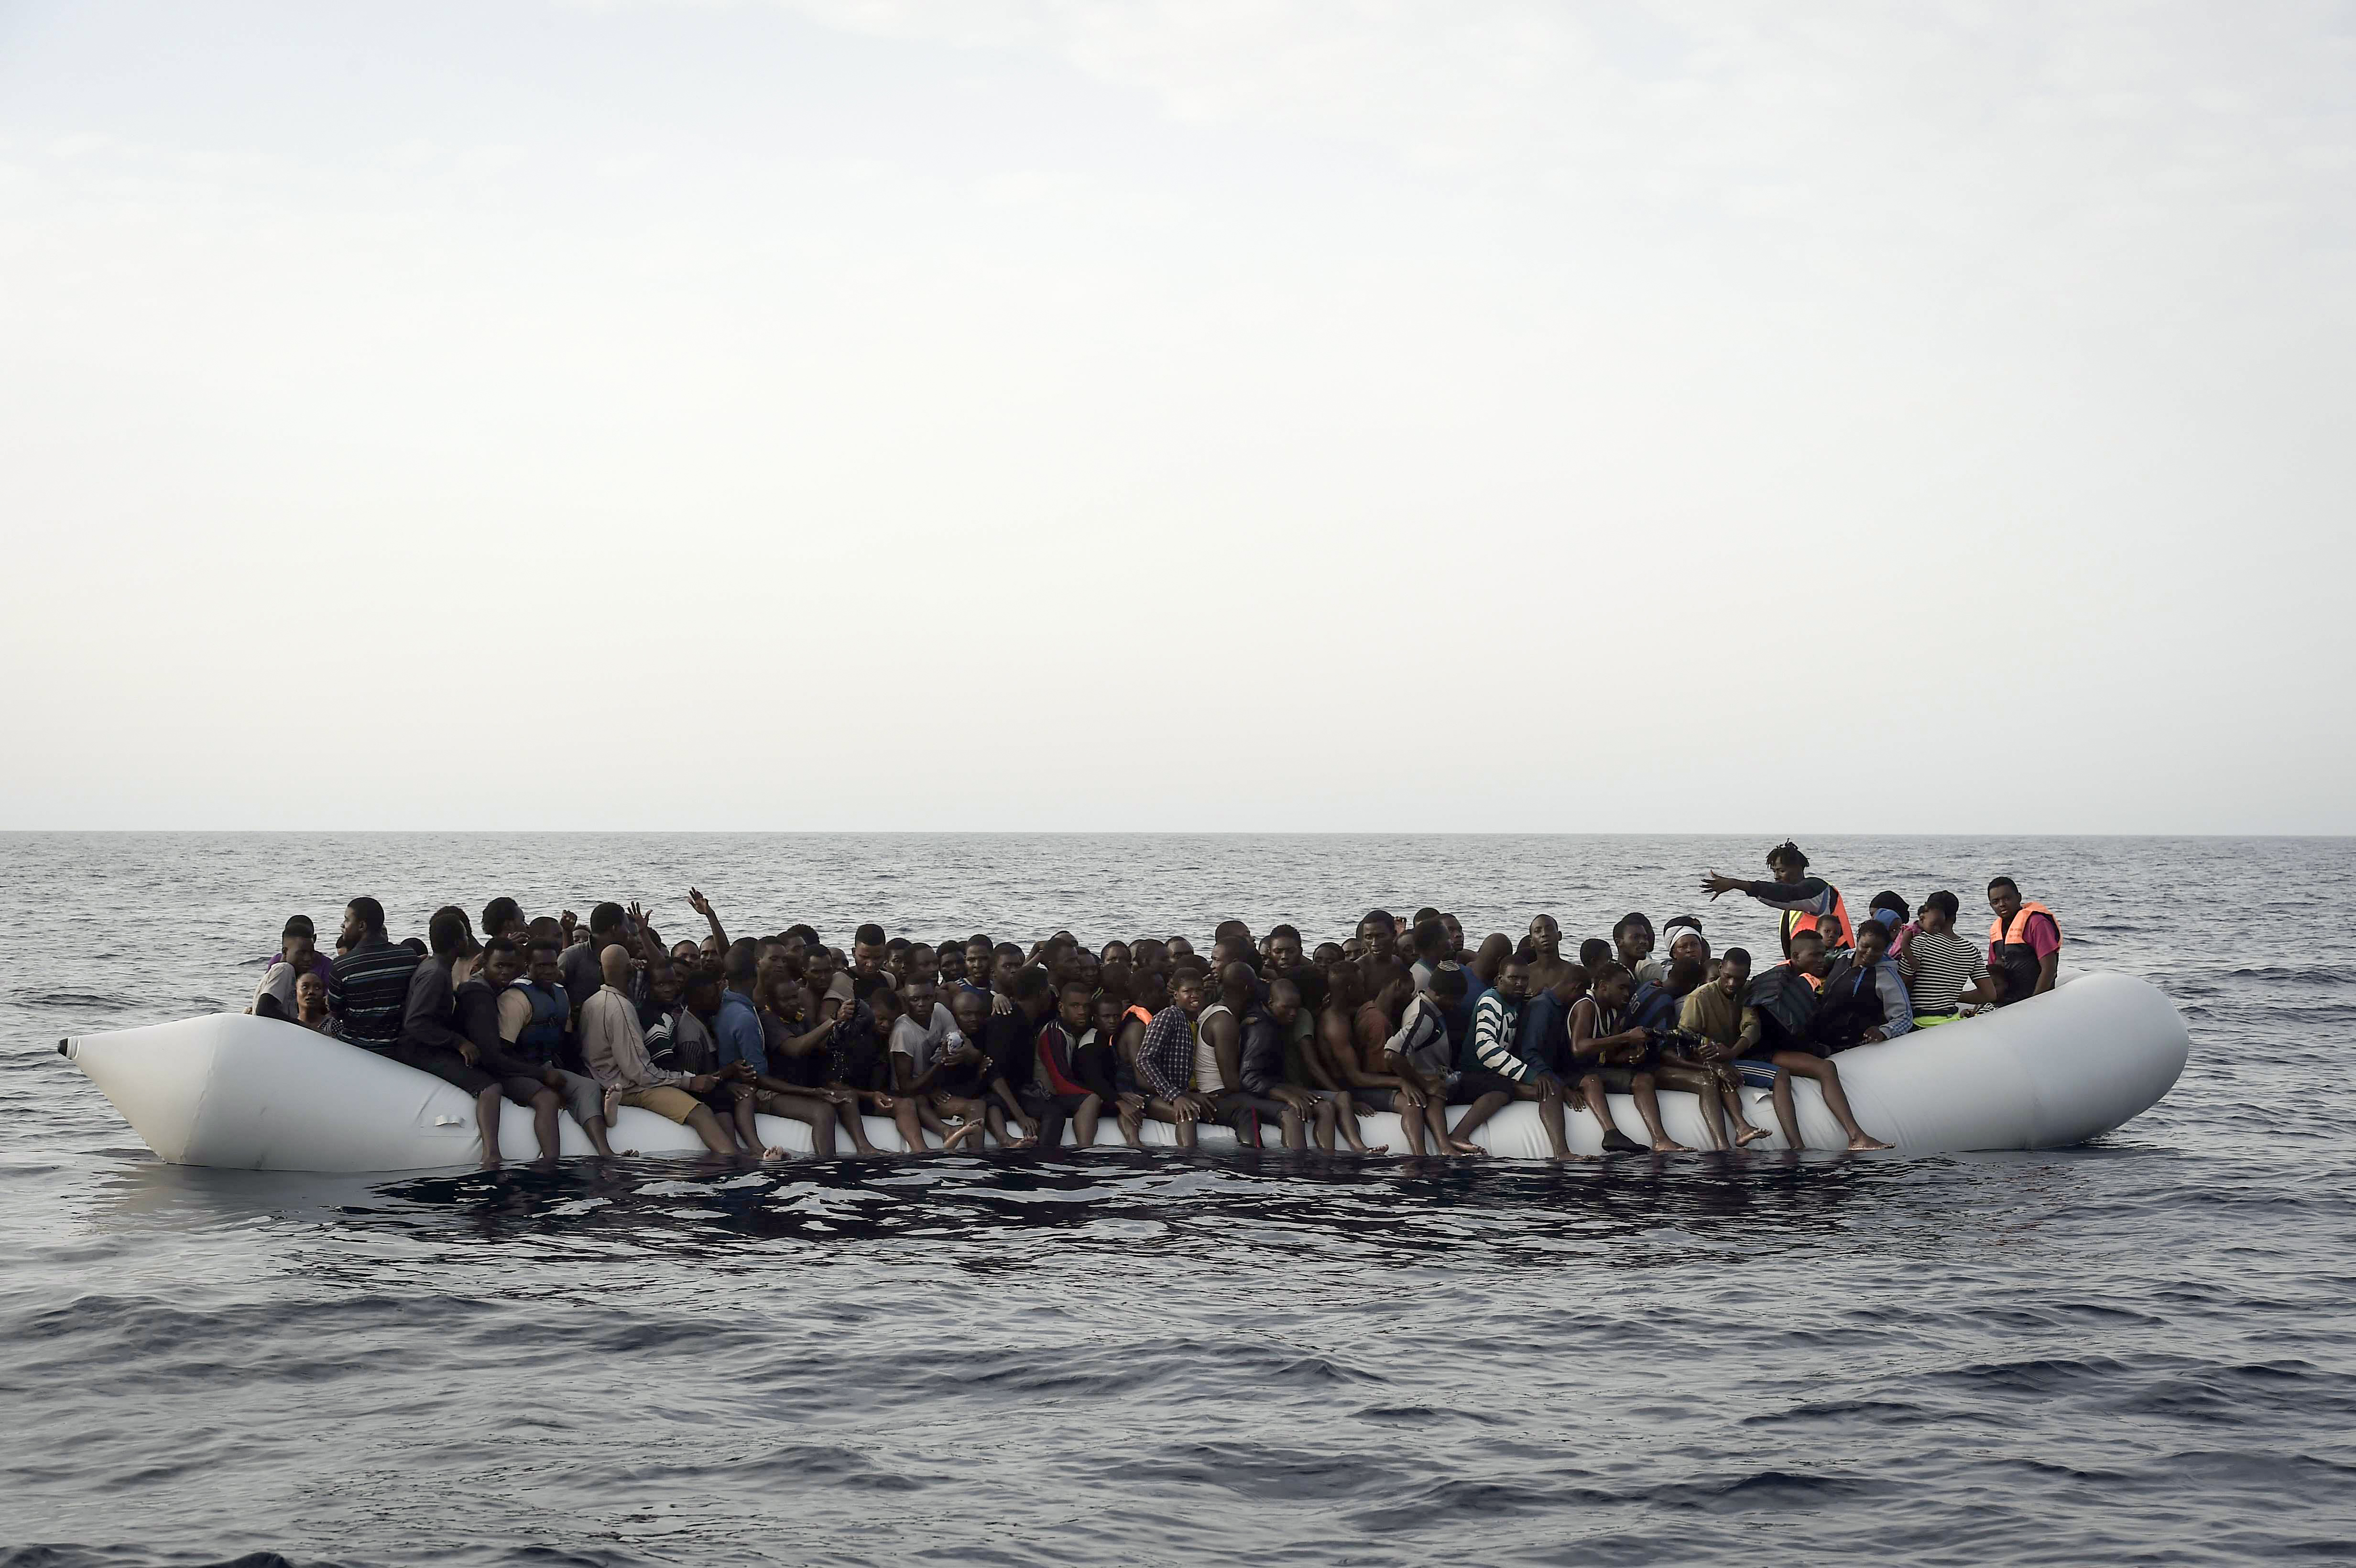 Migrants wait to be rescued by members of Proactiva Open Arms NGO in the Mediterranean Sea, some 12 nautical miles north of Libya, on October 4, 2016. At least 1,800 migrants were rescued off the Libyan coast, the Italian coastguard announced, adding that similar operations were underway around 15 other overloaded vessels. / AFP PHOTO / ARIS MESSINIS